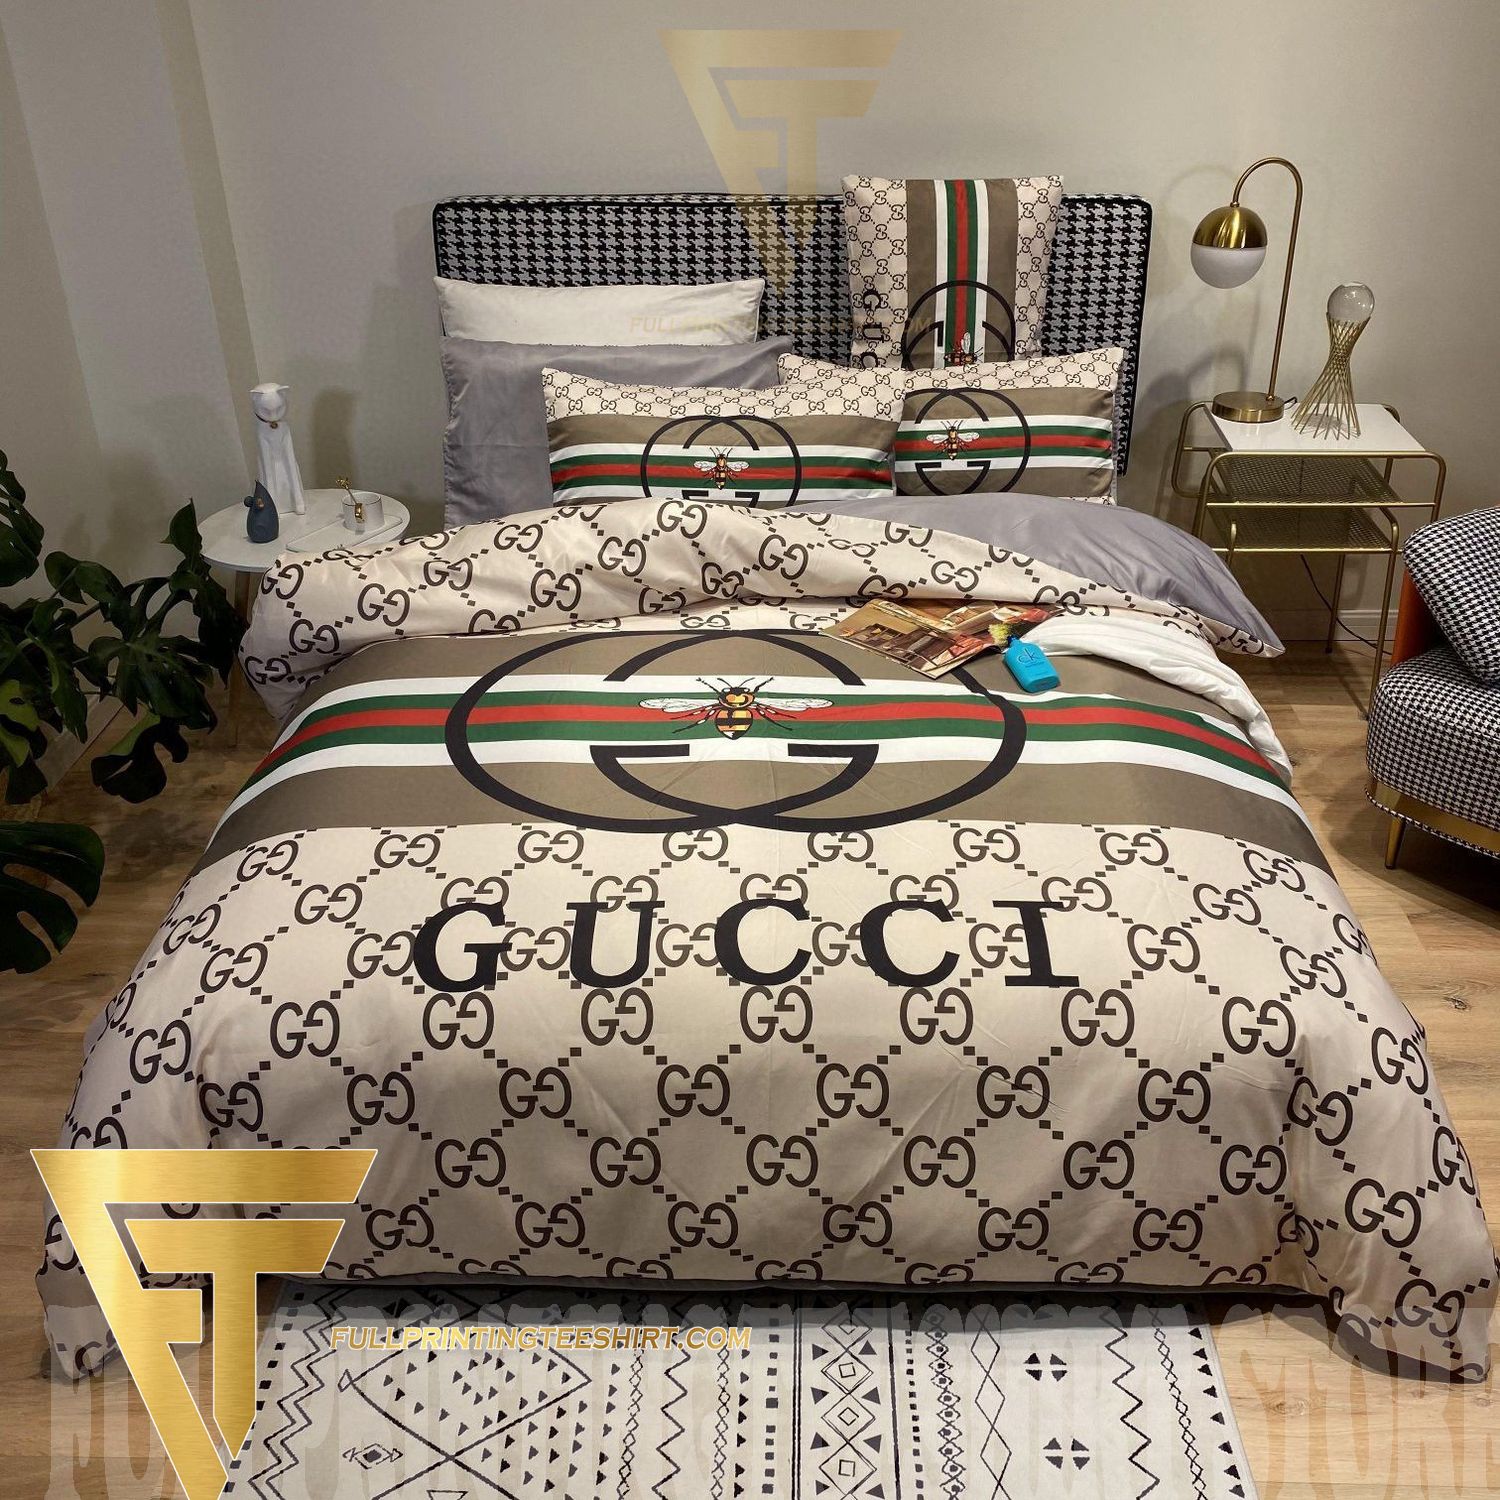 sandwich Grundig sur Top-selling item] Gucci Type 21 Luxury Brand Home Decor Duvet Cover Bedroom  Sets